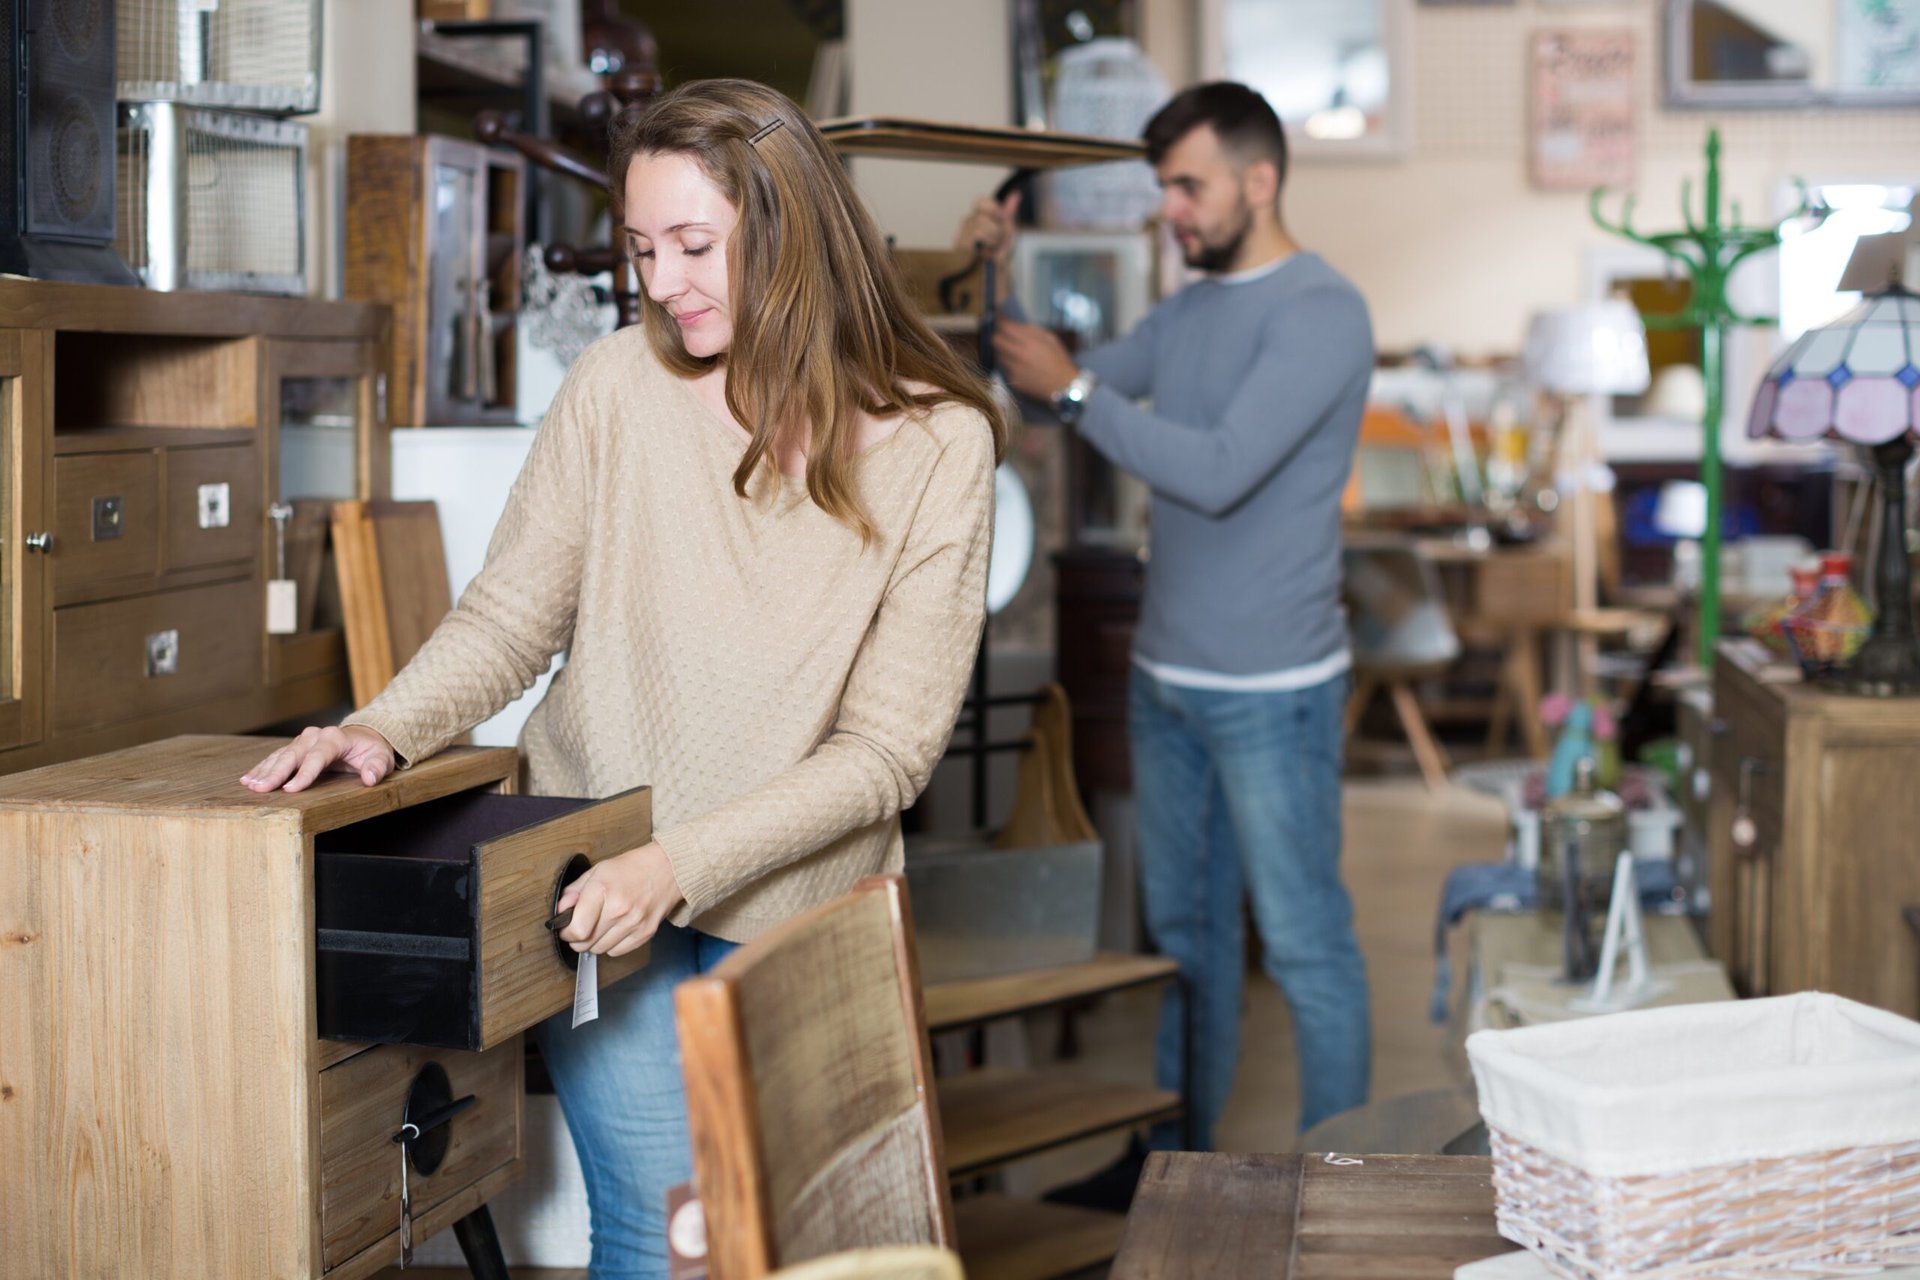 Couple looking for furniture in second hand shop